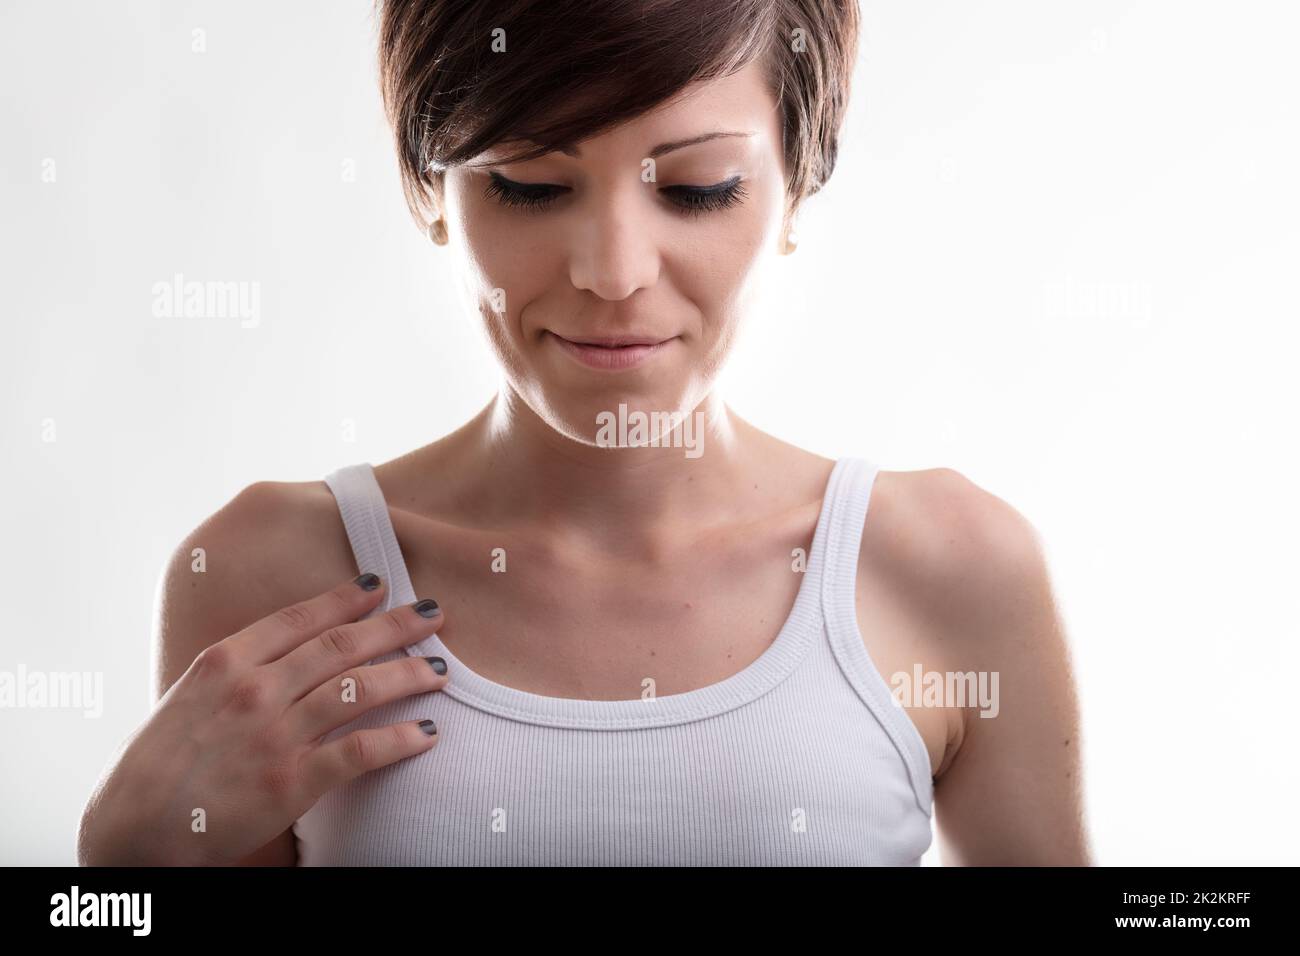 Demure young woman with her hand to her chest Stock Photo